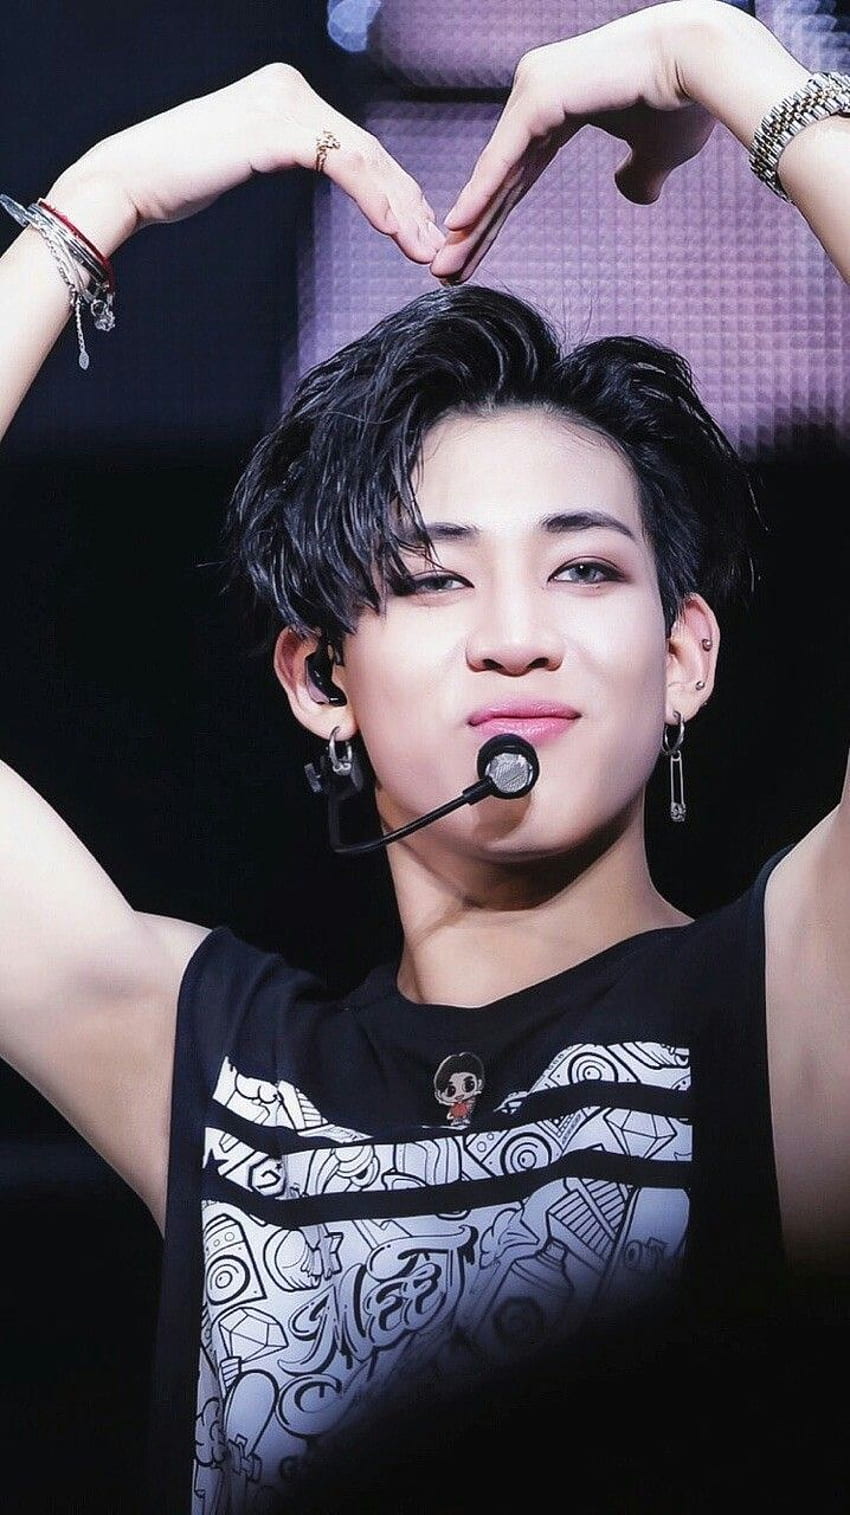 GOT7 Mark And BamBam's Matching “7” Tattoos Earn Mixed Reactions From  Netizens - YouTube